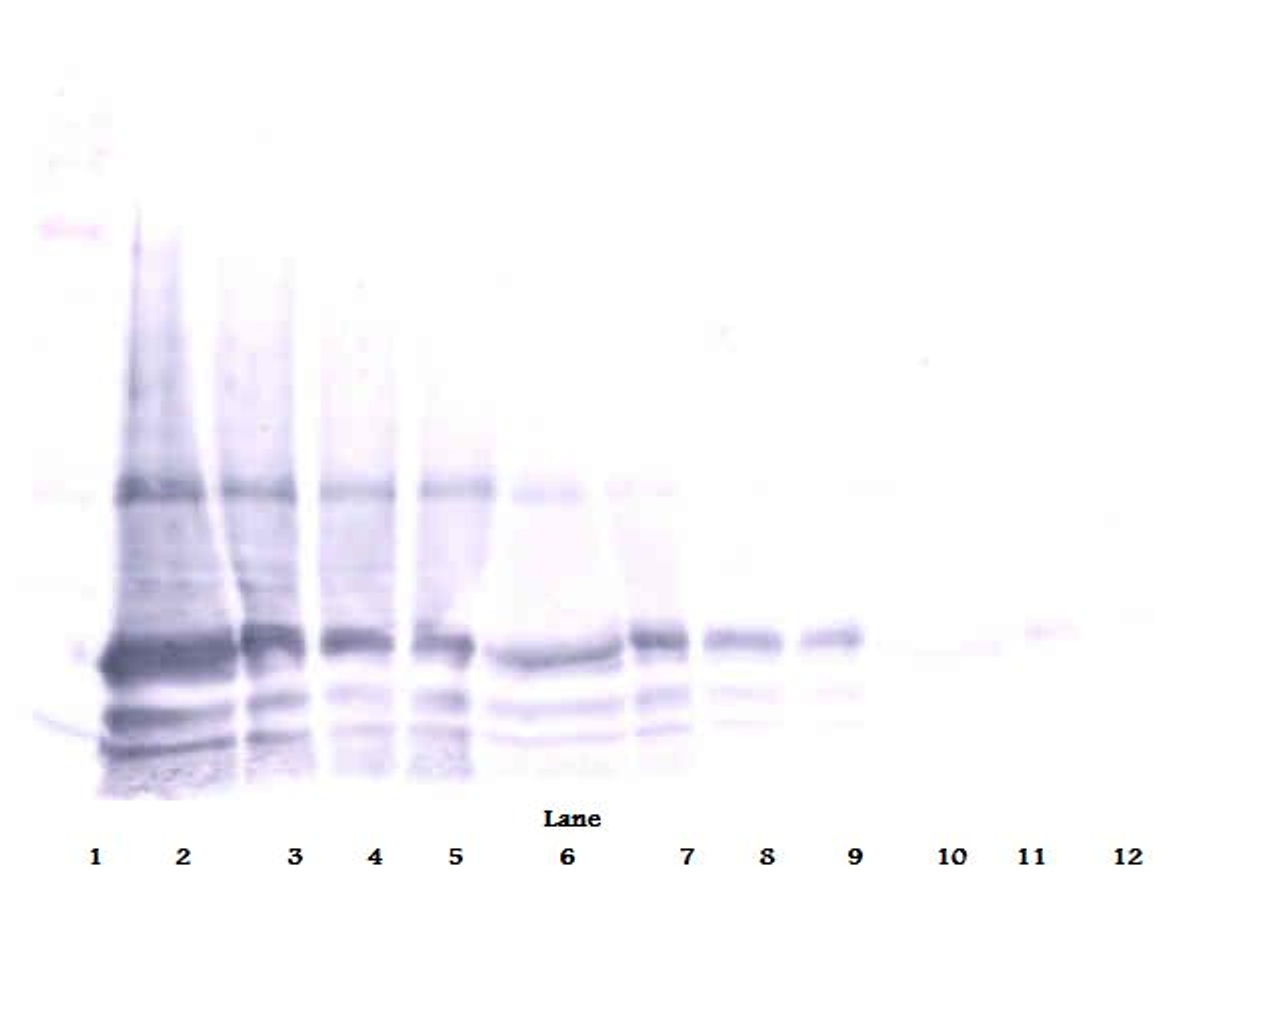 To detect Rat IL-6 by Western Blot analysis this antibody can be used at a concentration of 0.1- 0.2 ug/ml. When used in conjunction with compatible secondary reagents, the detection limit for recombinant Rat IL-6 is 1.5-3.0 ng/lane, under either reducing or non-reducing conditions.